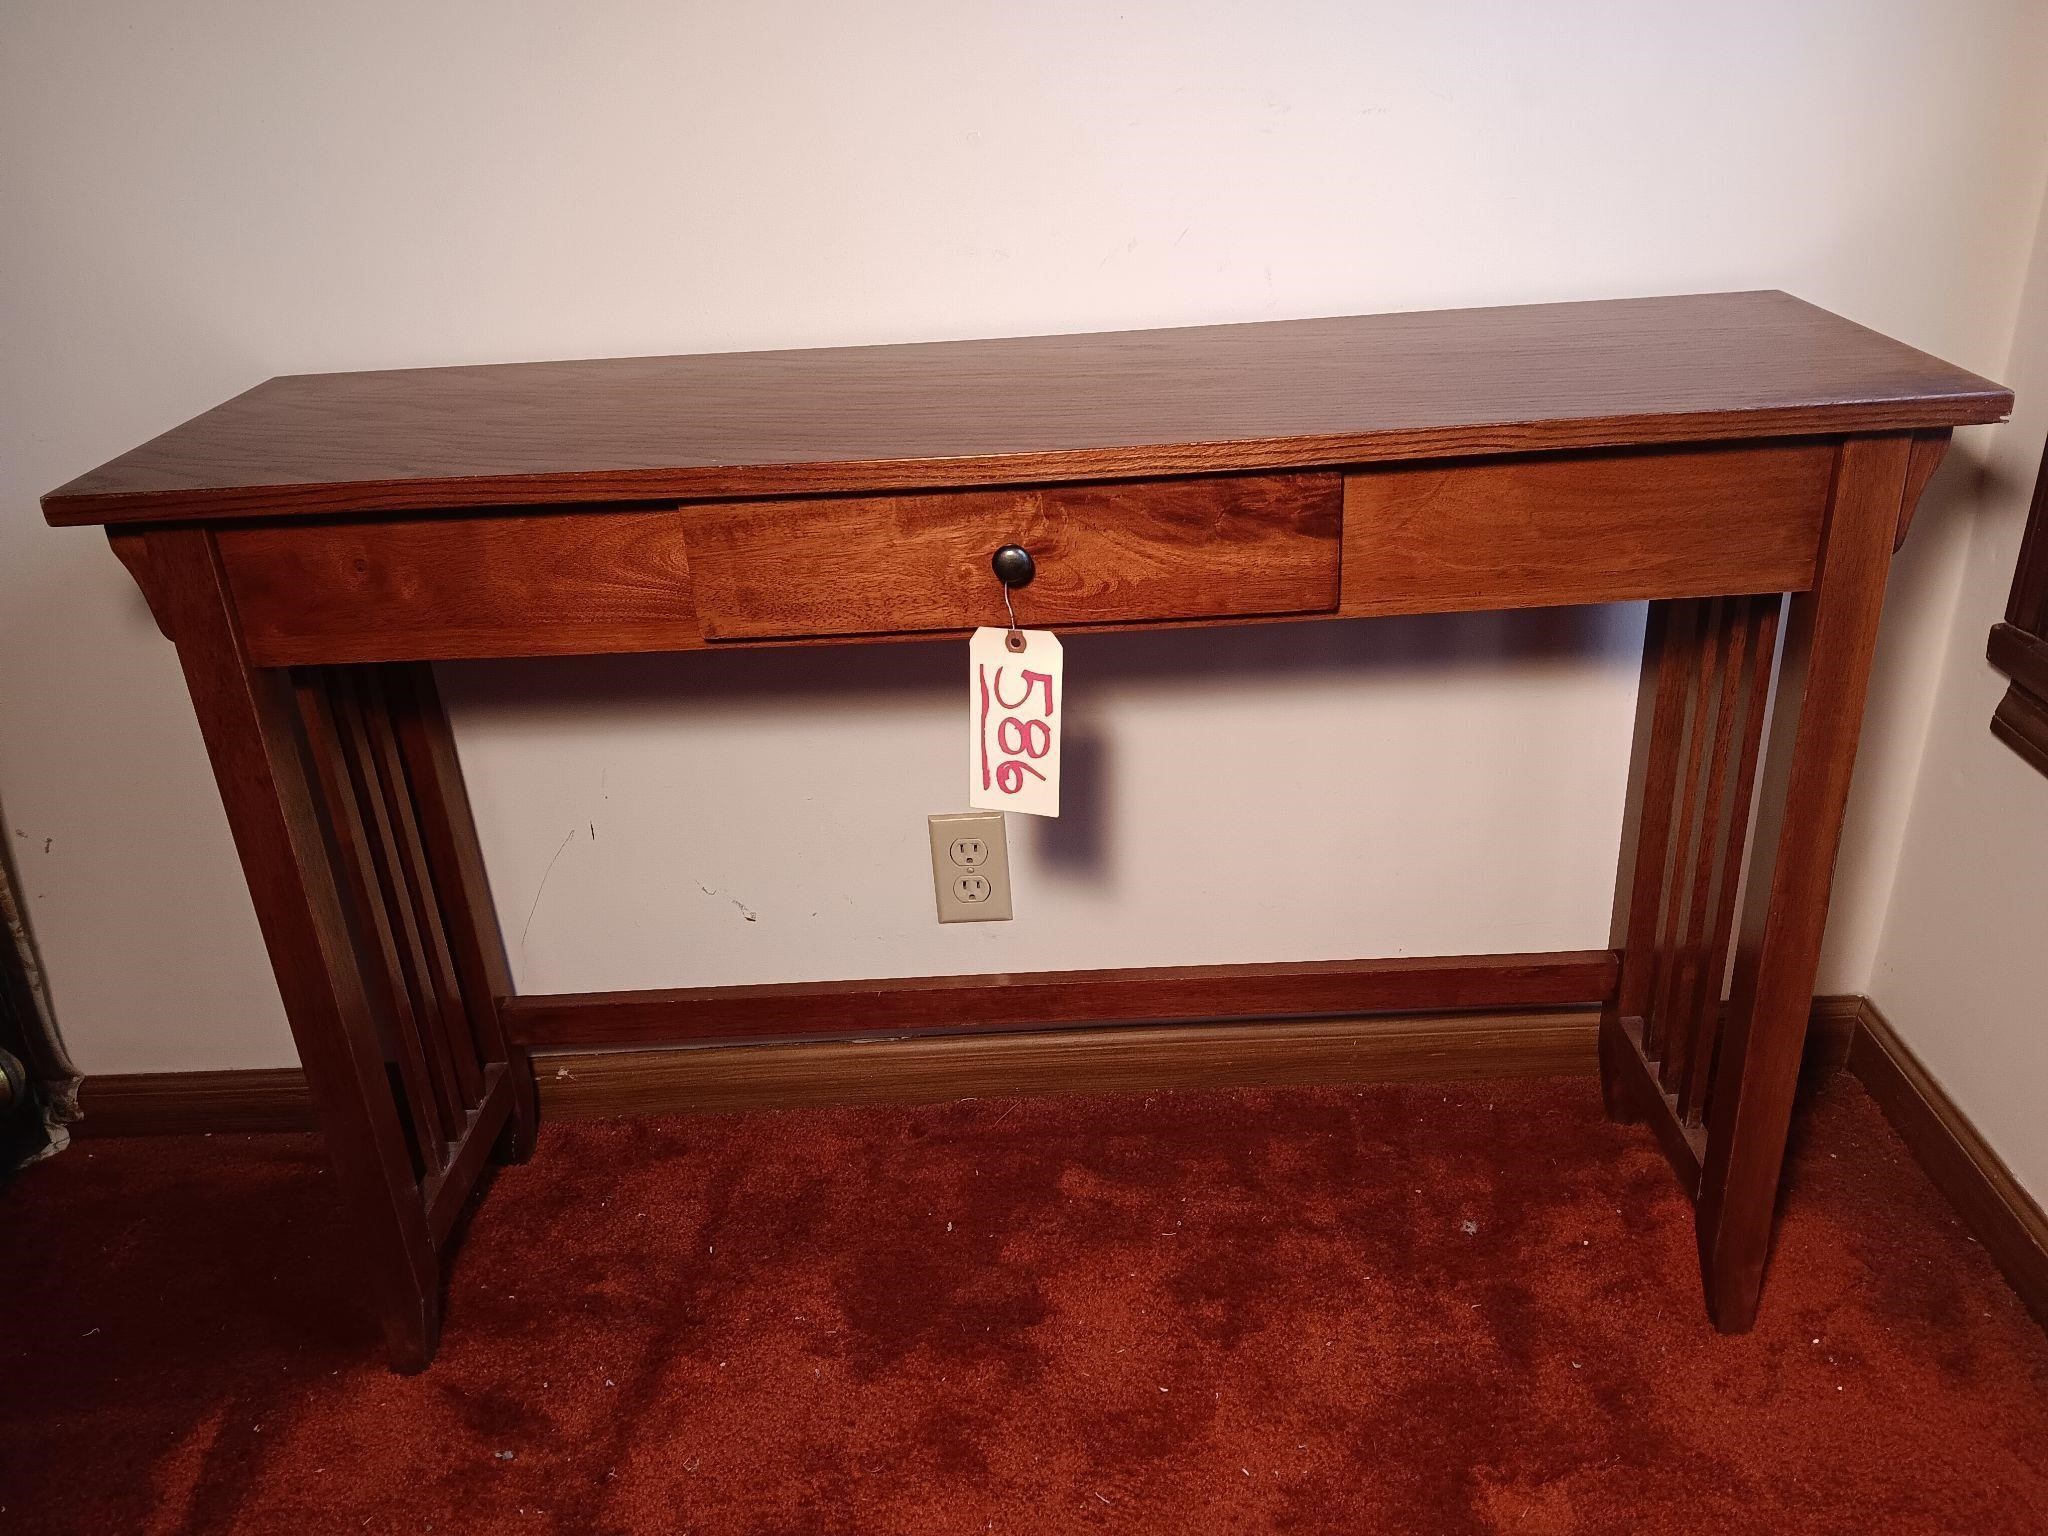 35" x 13" x 29" Mission Style Hall Table W/Drawer.